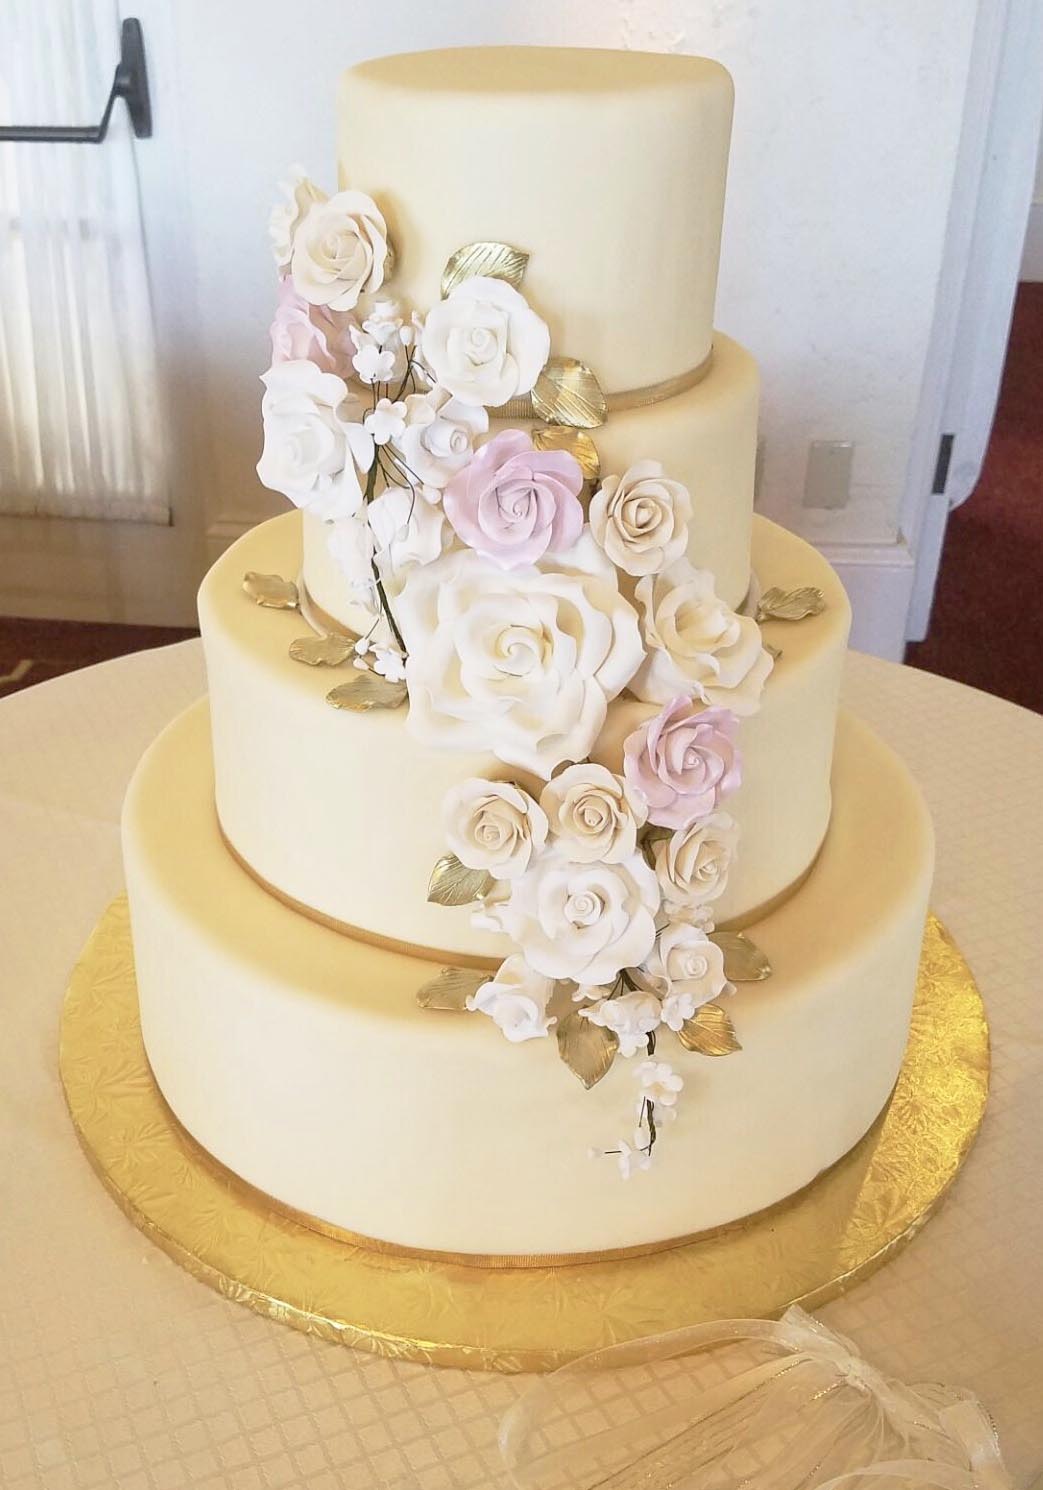 A3. White chocolate fondant covered three tier cake with gumpaste roses and golden leaves and ribbon